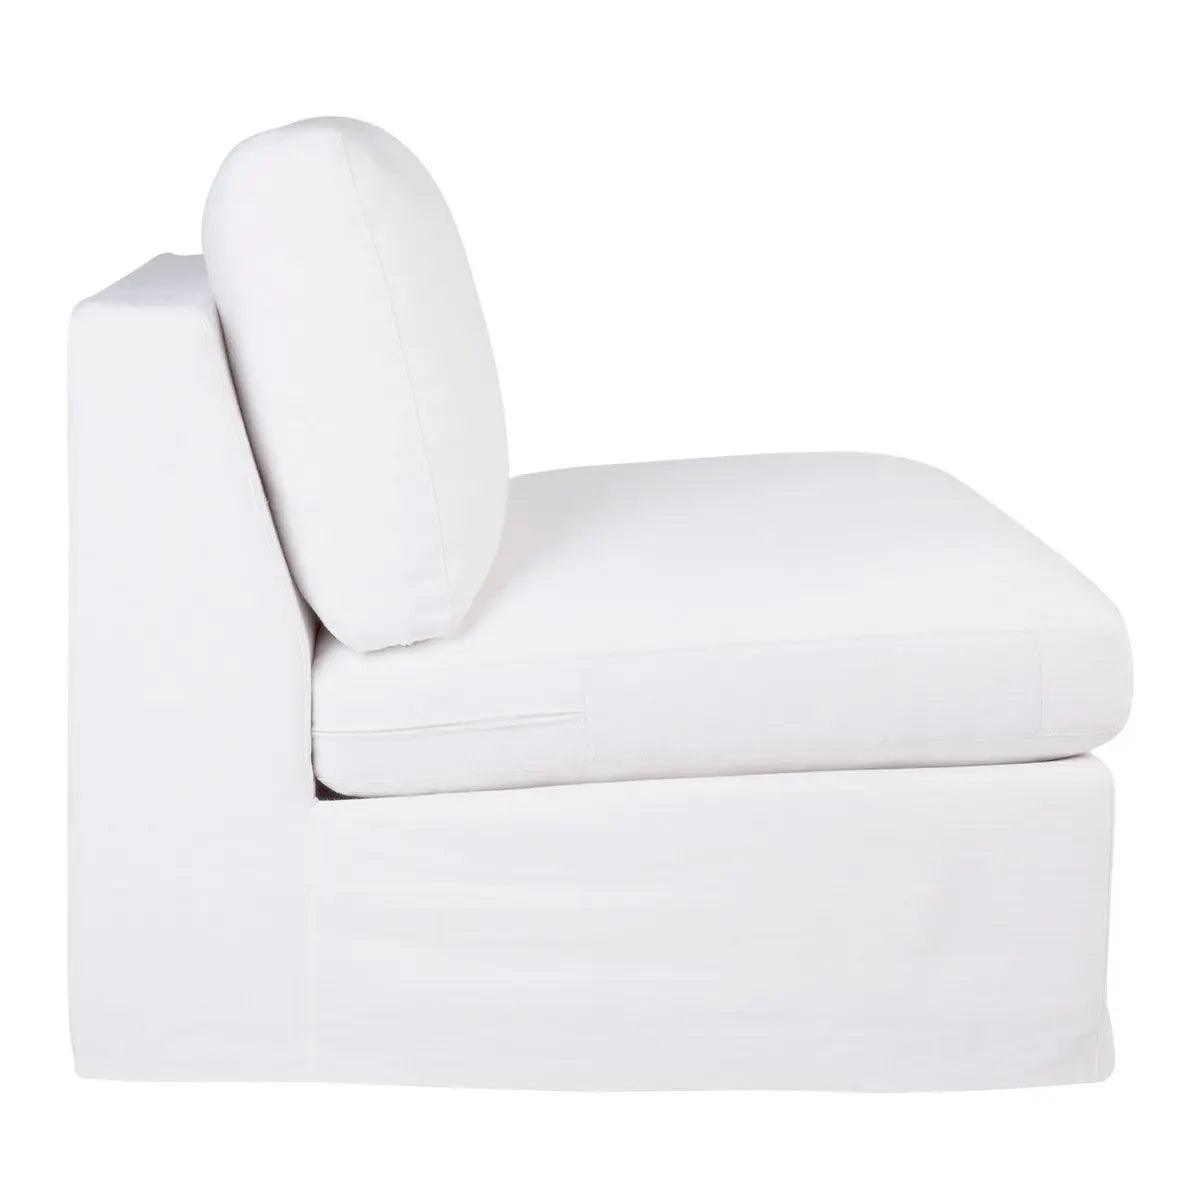 Cafe Lighting & Living Birkshire Slip Cover Occasional Chair - White Linen - Occasional Chair324569320294120910 8